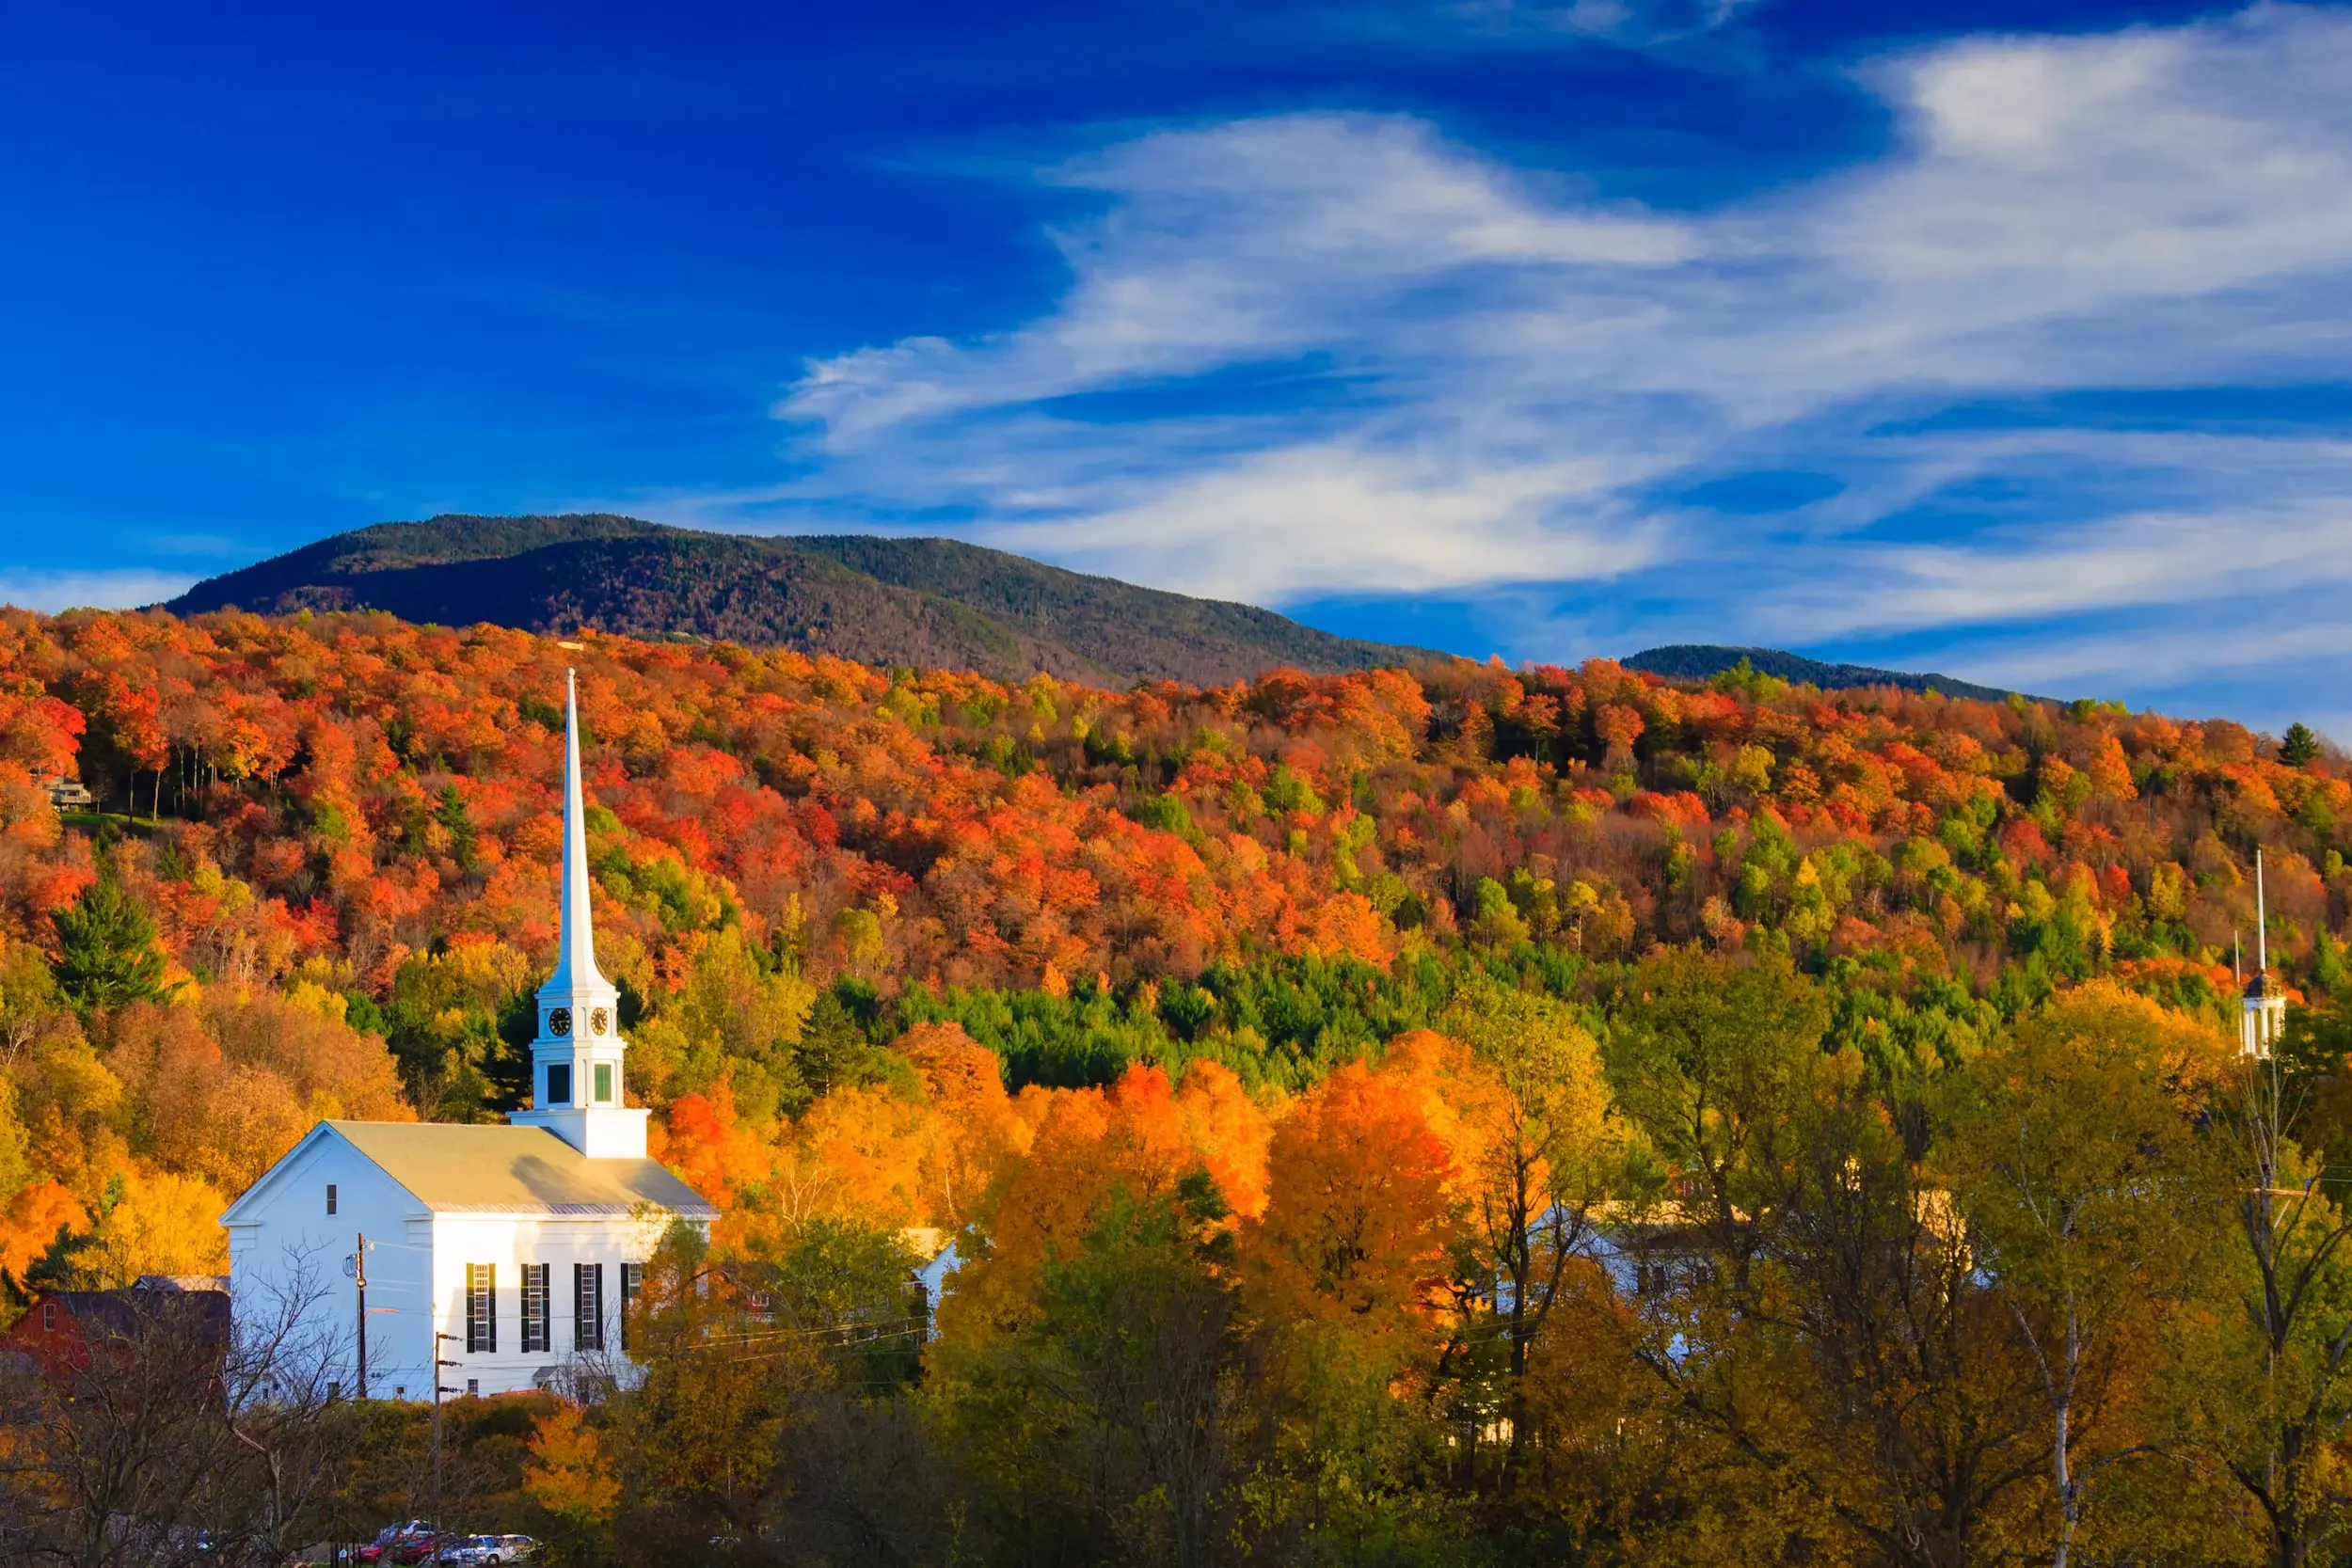 Fall, Autumn Foliage and the Stowe Community Church, Stowe, Vermont, USA